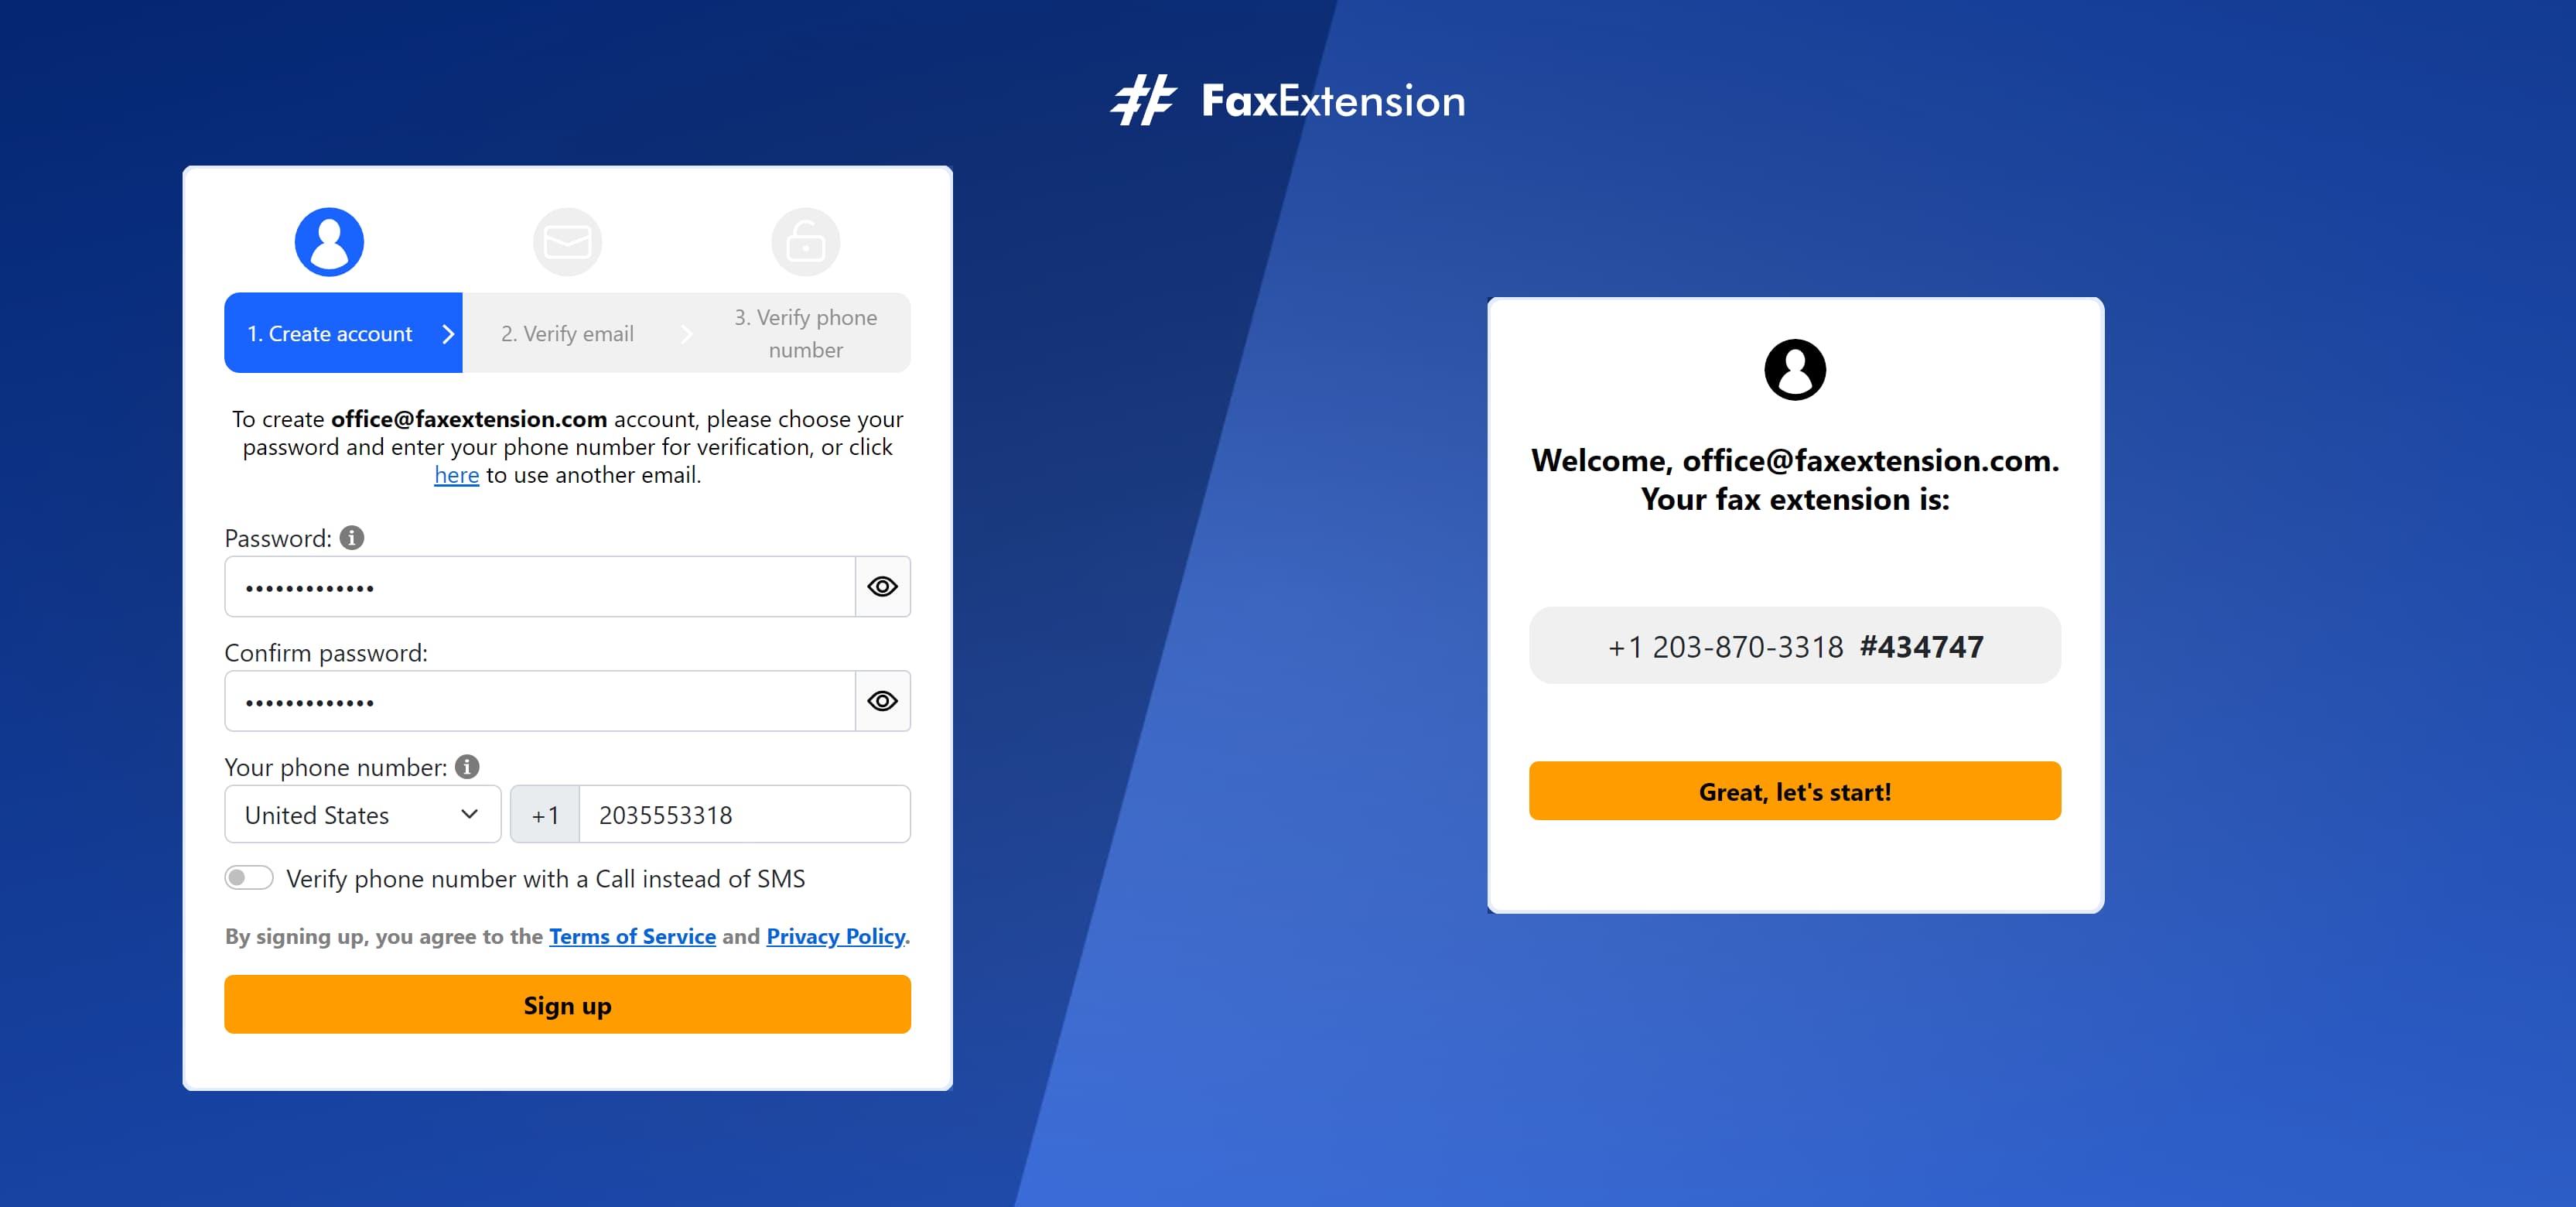 Get your own free fax extension number instantly